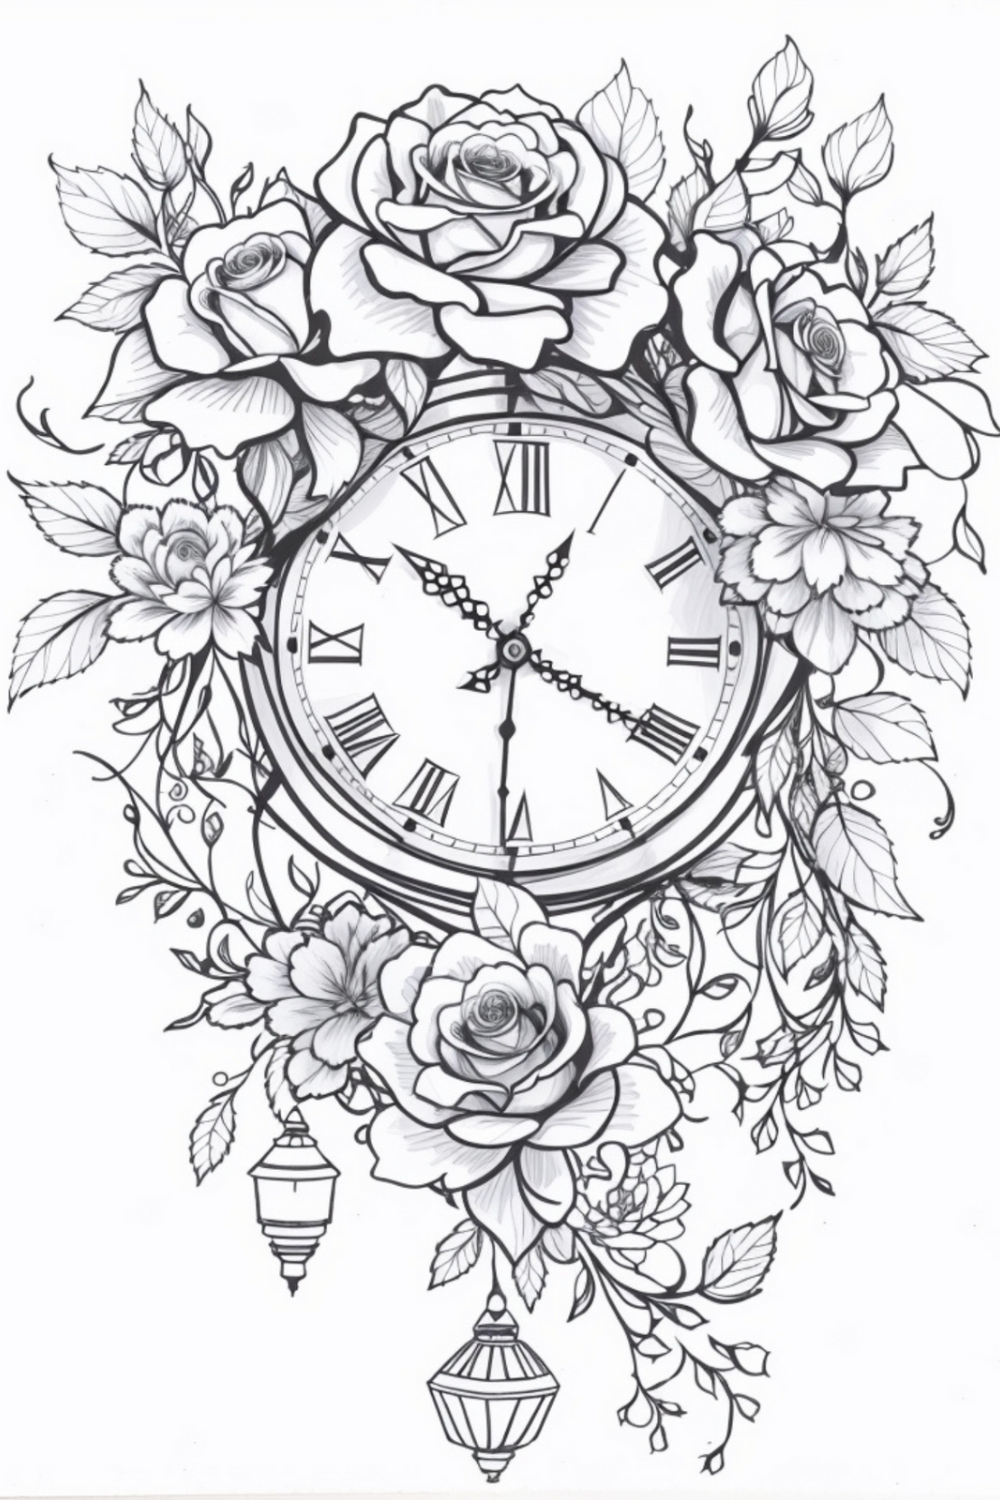 25 Printable Rose Designs Adult Coloring pages | Coloring Pages for adults pinterest preview image.